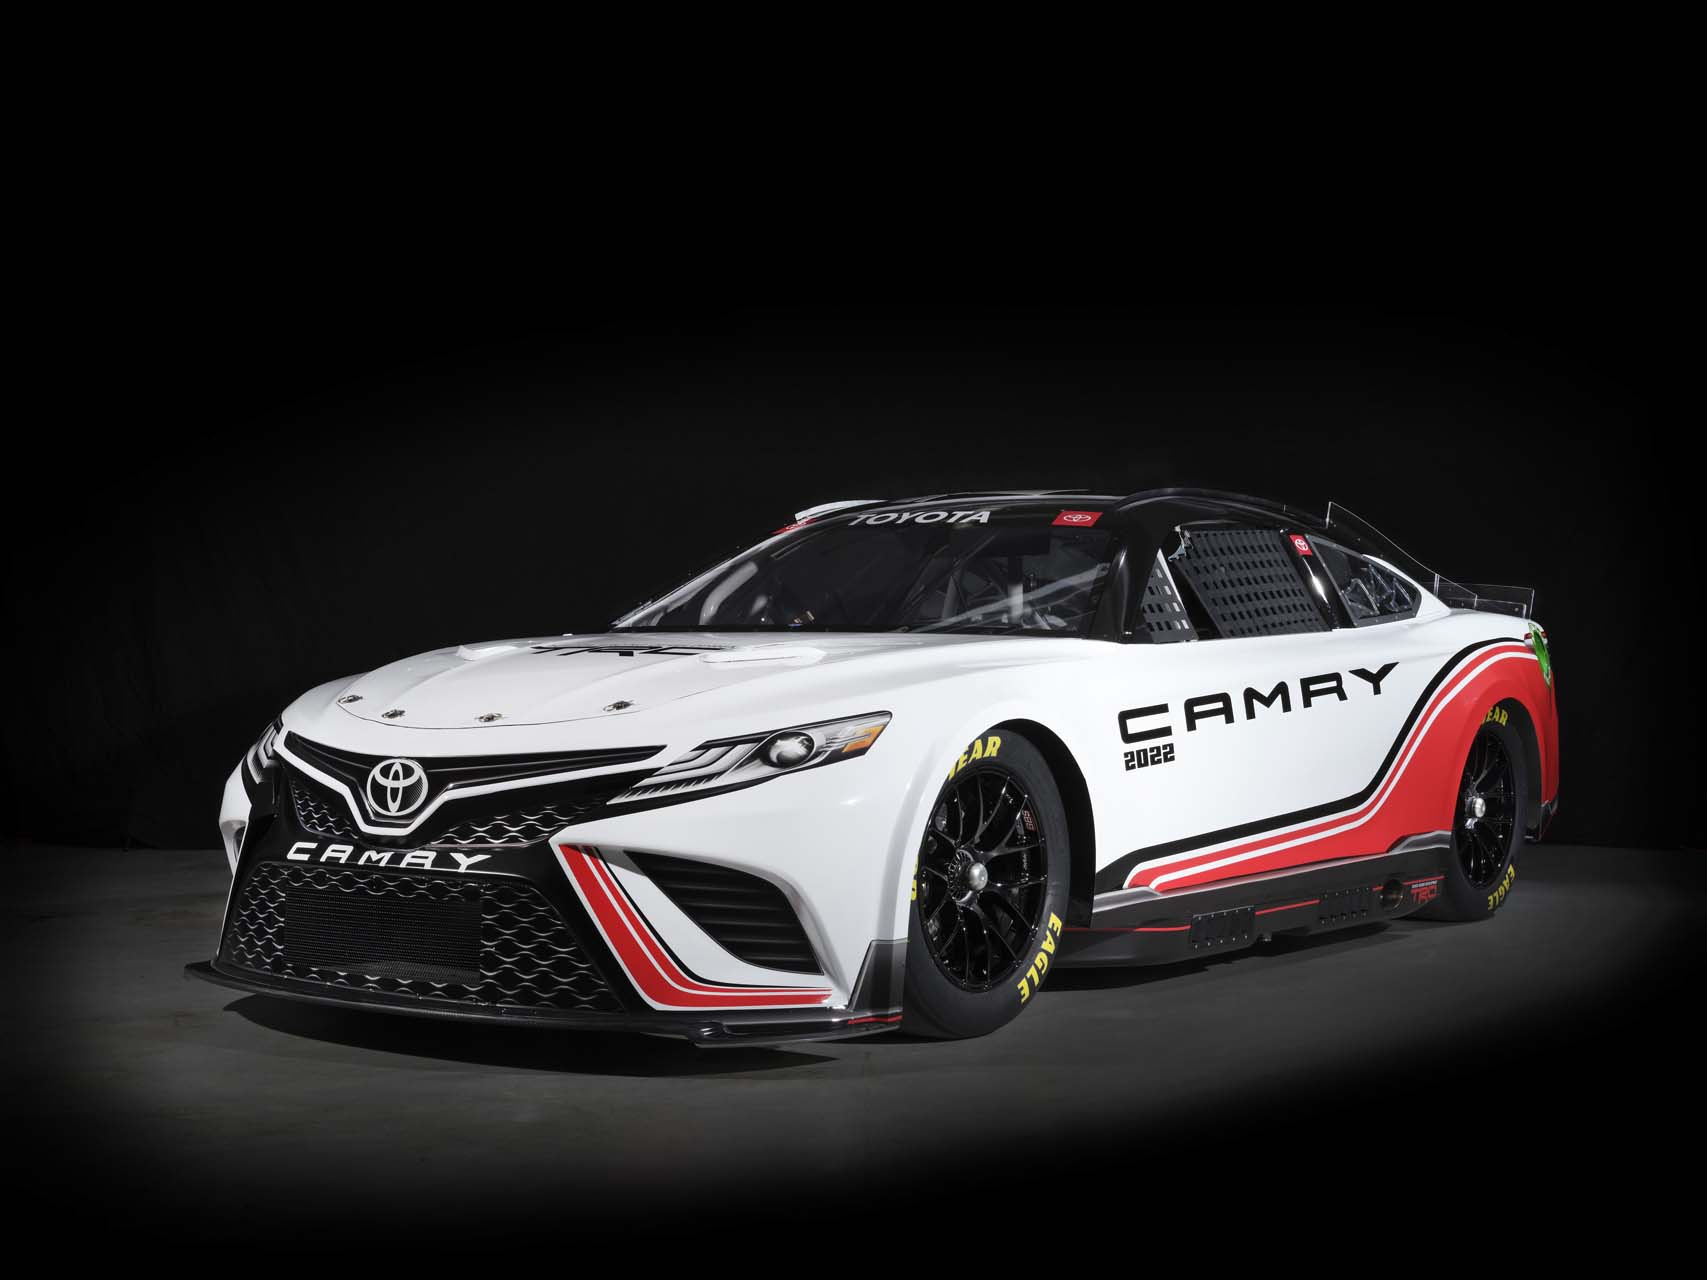 NASCAR Next Gen race car debuts, brings the sport into the 21st century